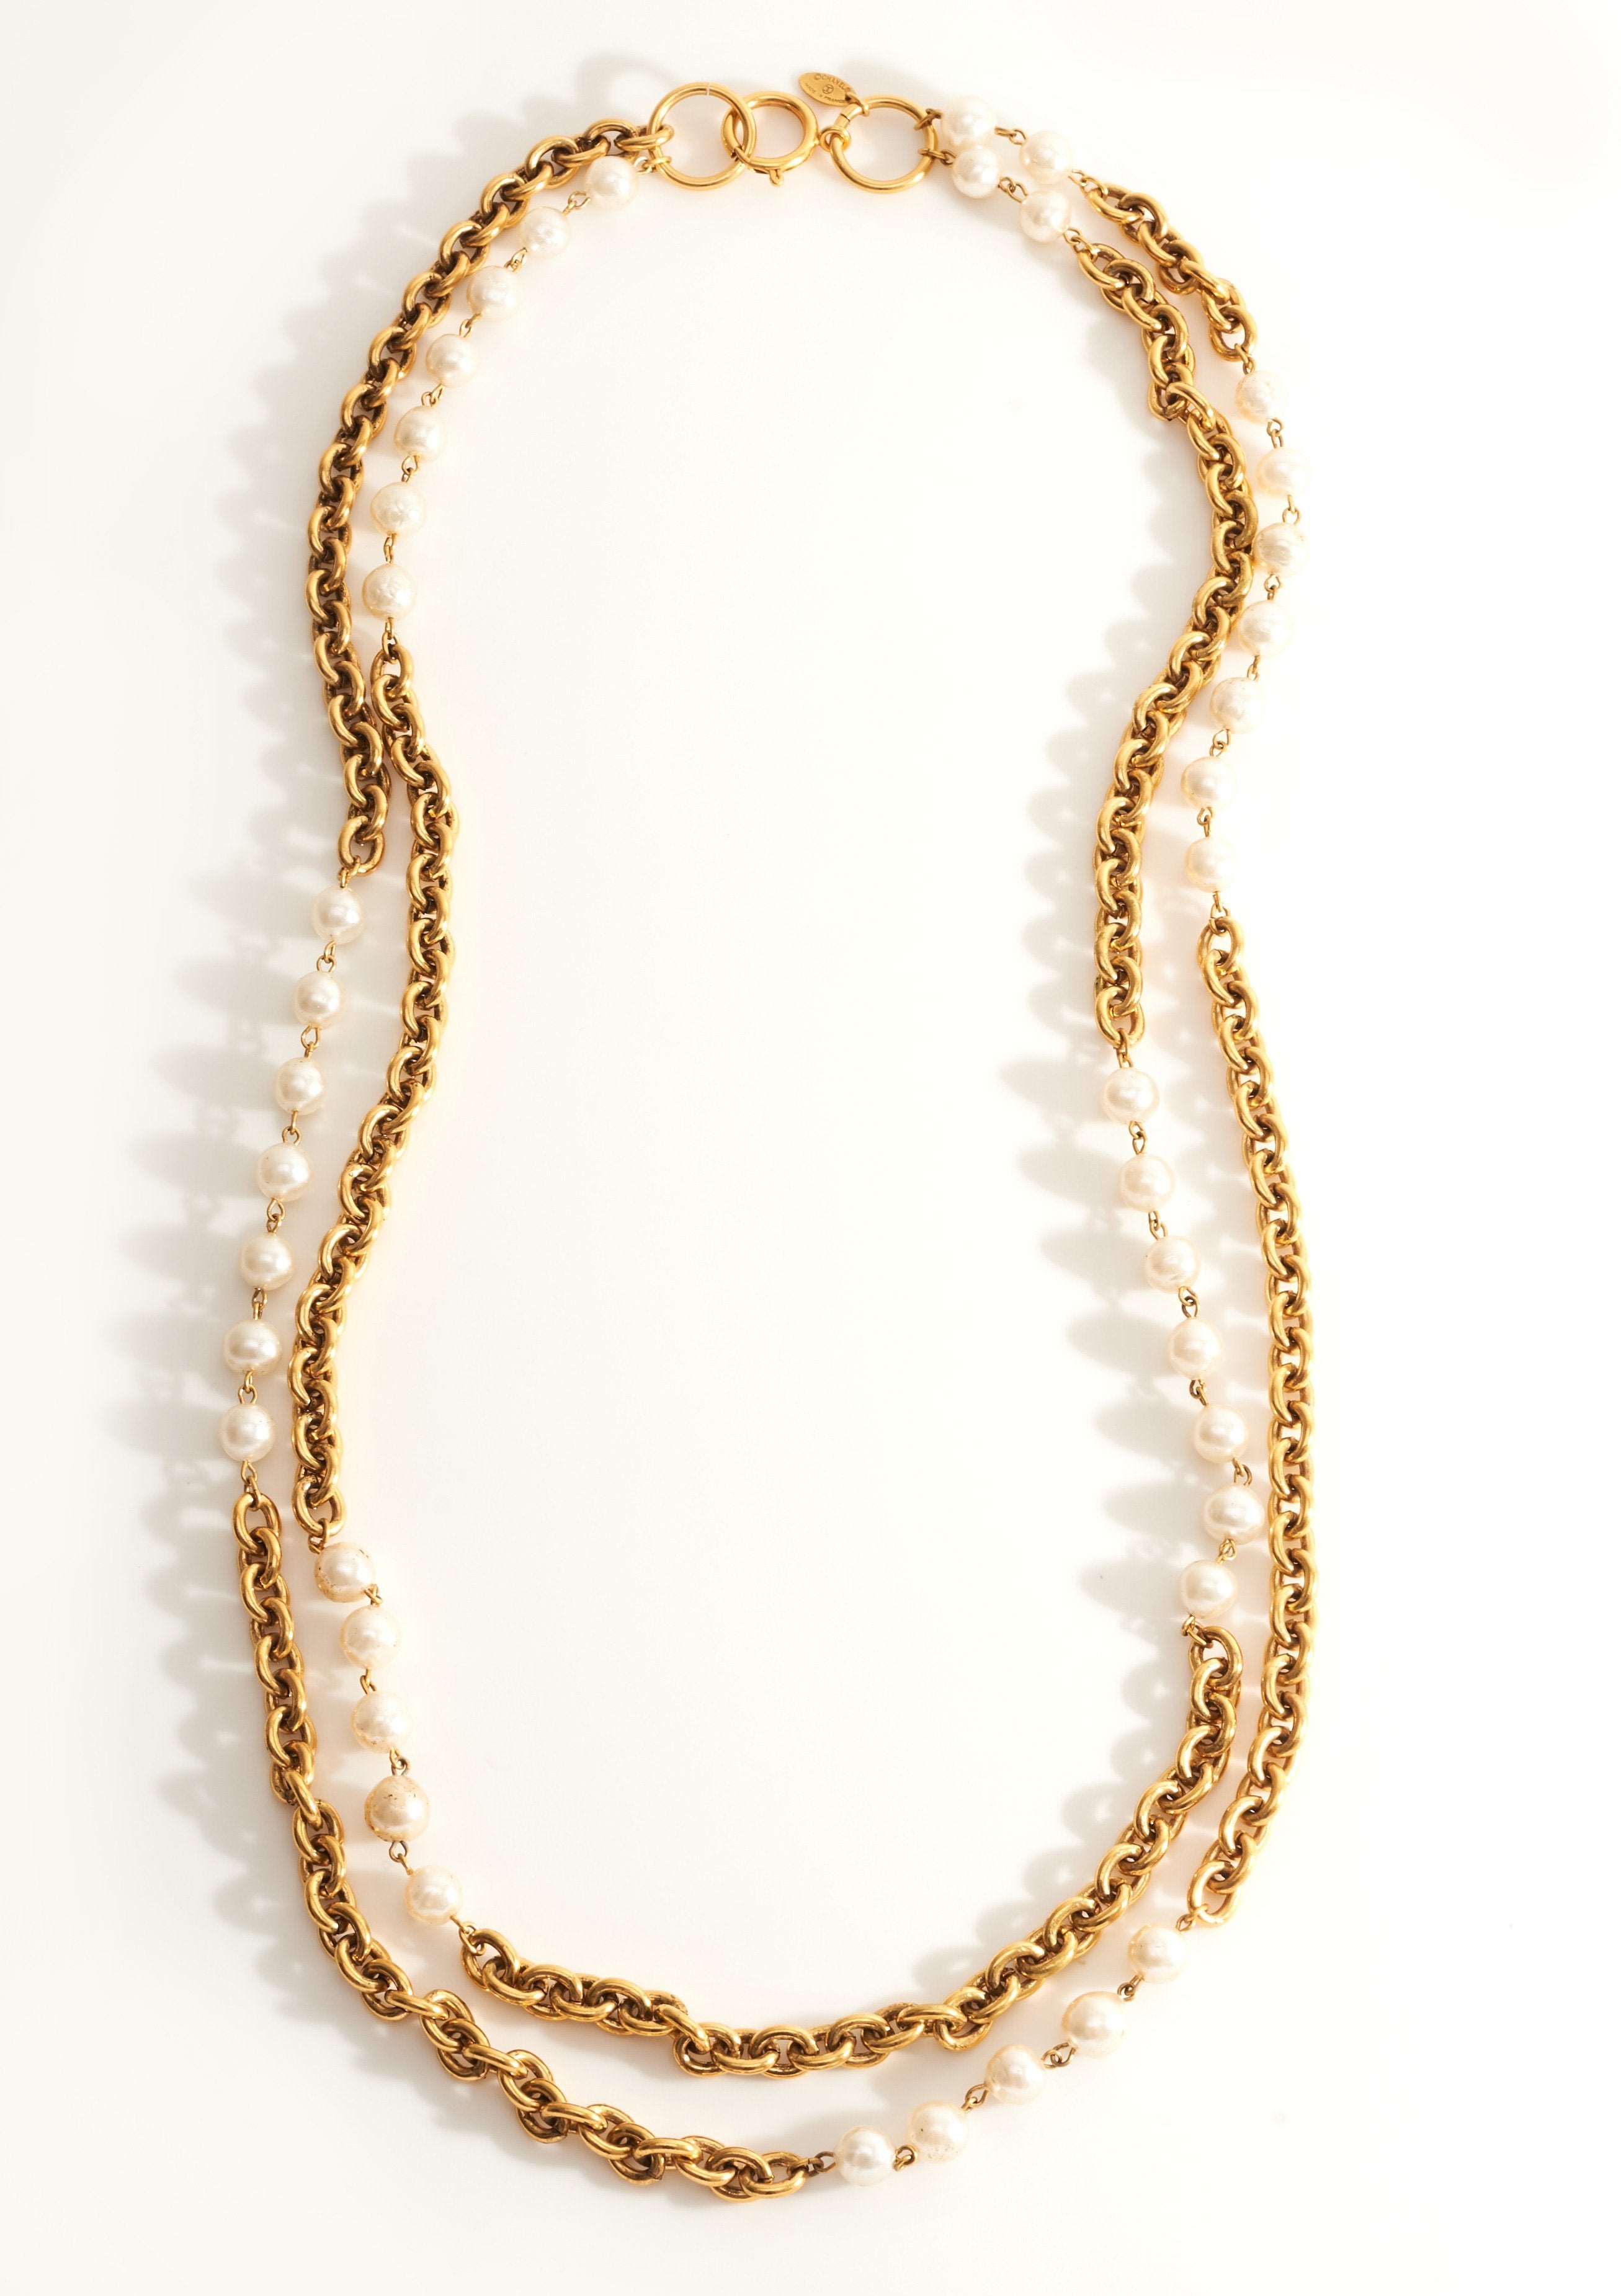 Chanel Vintage Rolo Chain Necklace